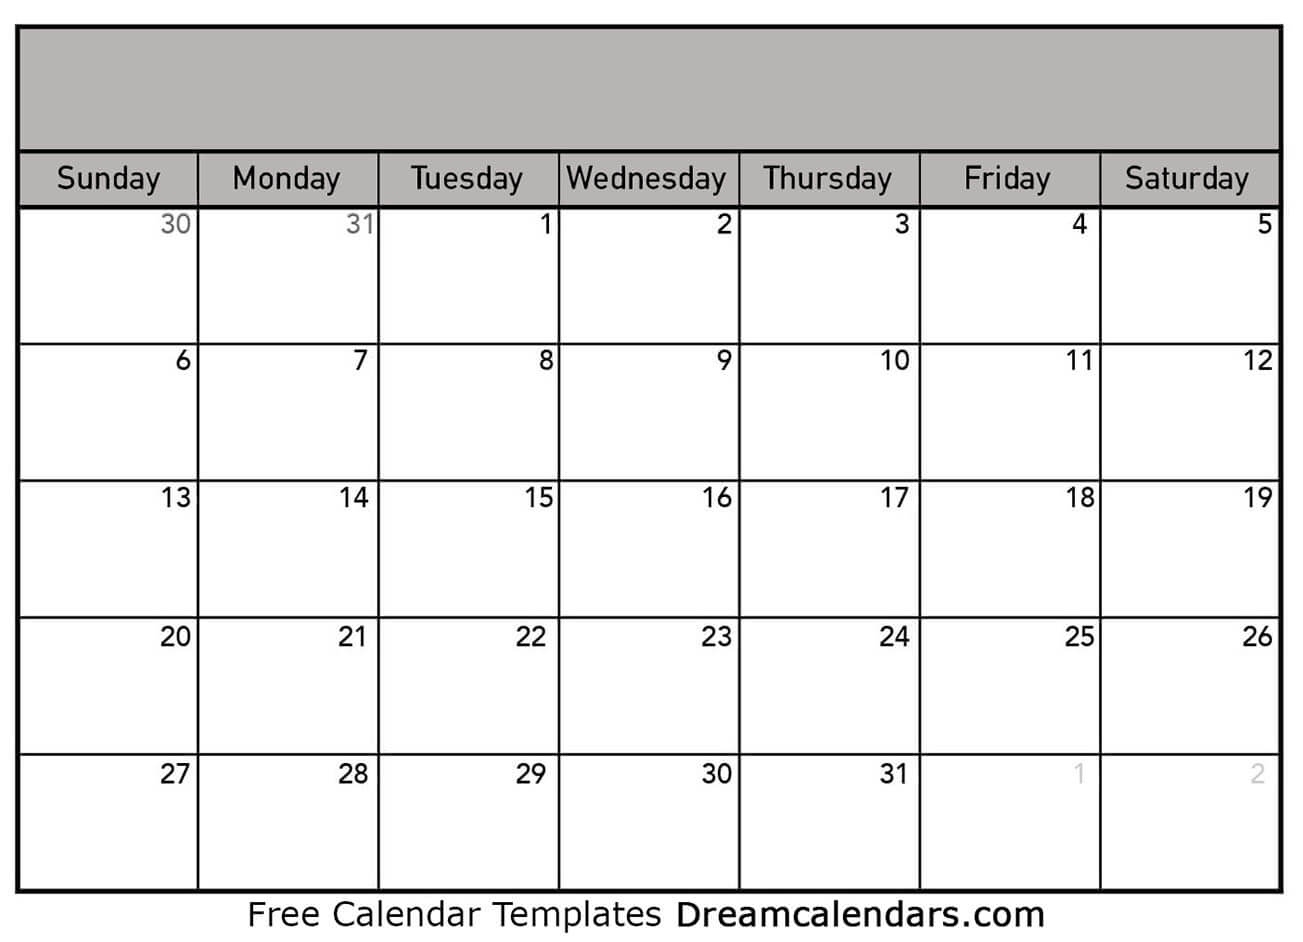 Incredible Blank Calendars With Days Of The Week Not Numbered